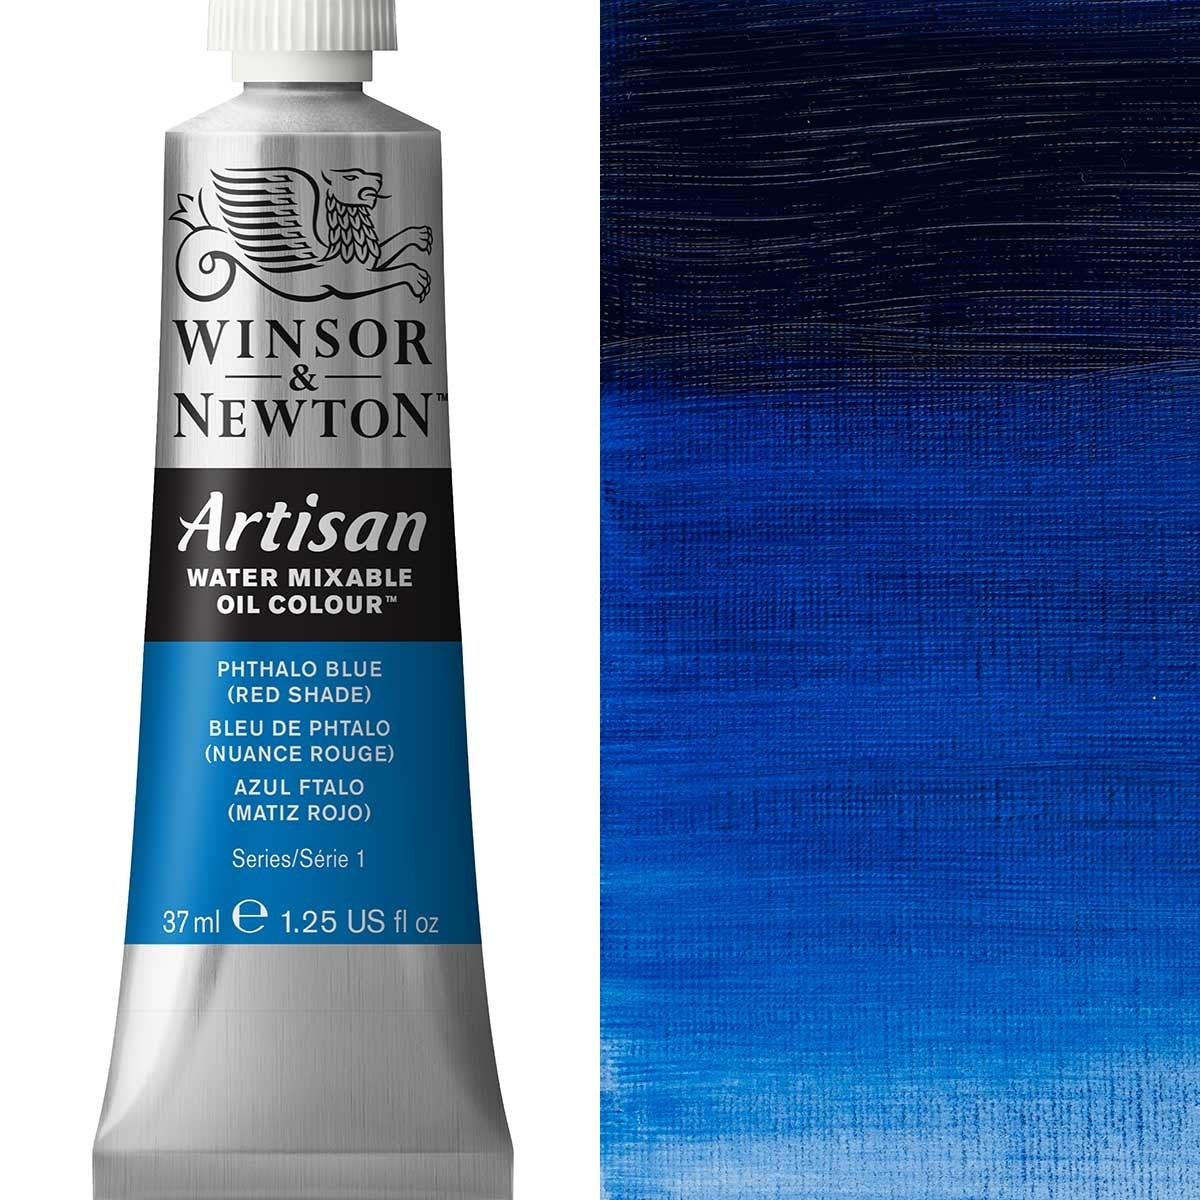 Winsor en Newton - Artisan Oil Color Water Mixable - 37 ml - Phthalo Blue Red Shade